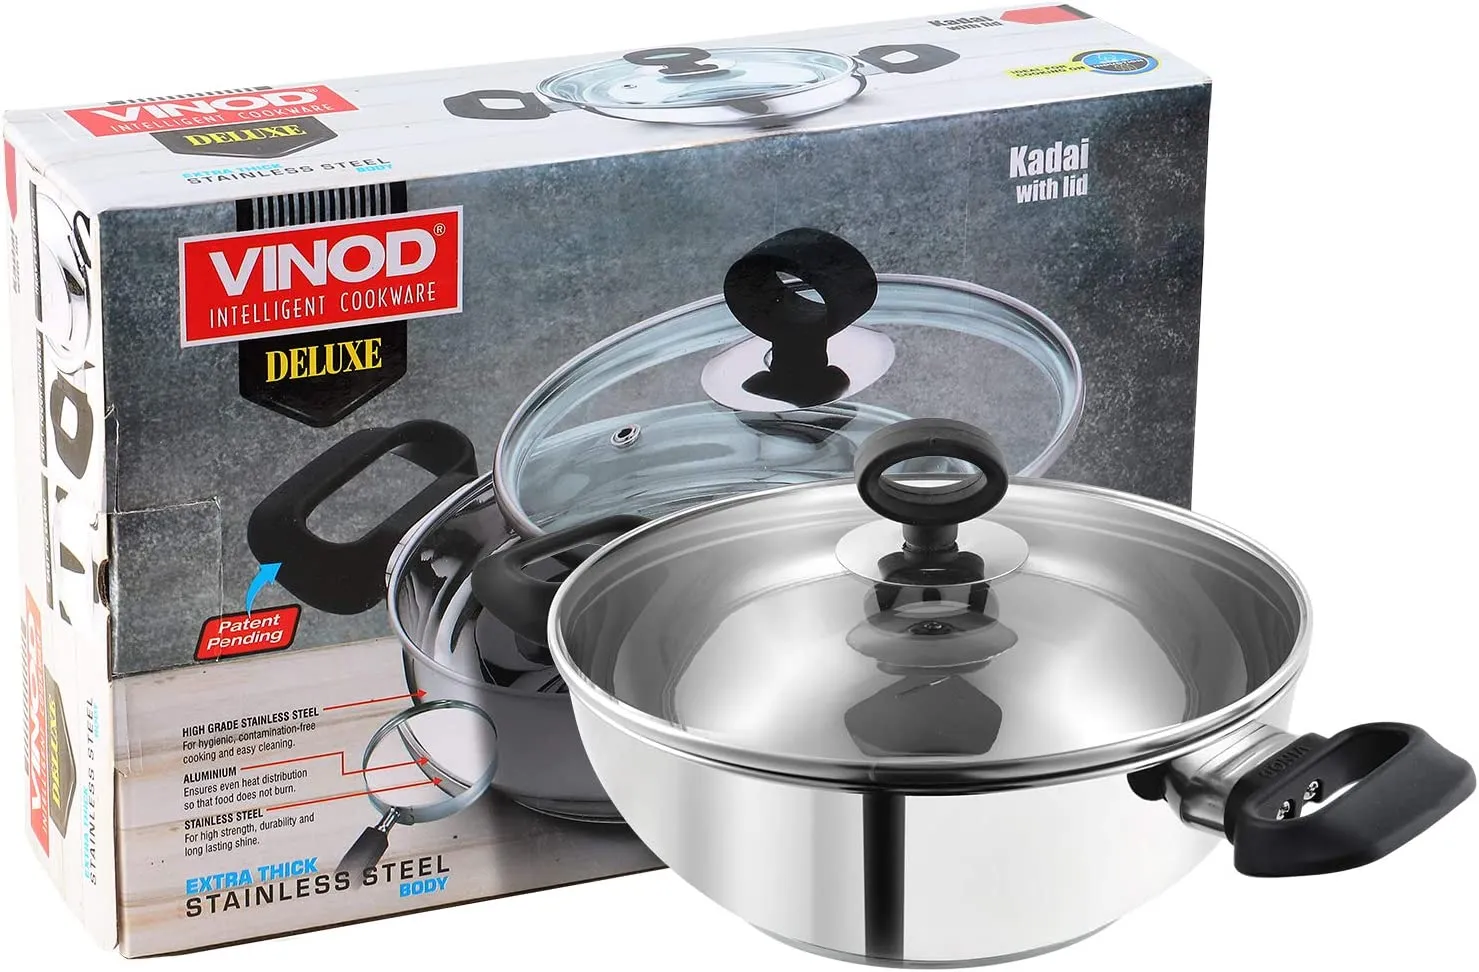 Vinod Deluxe Stainless Steel 24cm 2.8 Litres Kadai with Lid (Induction Base)1